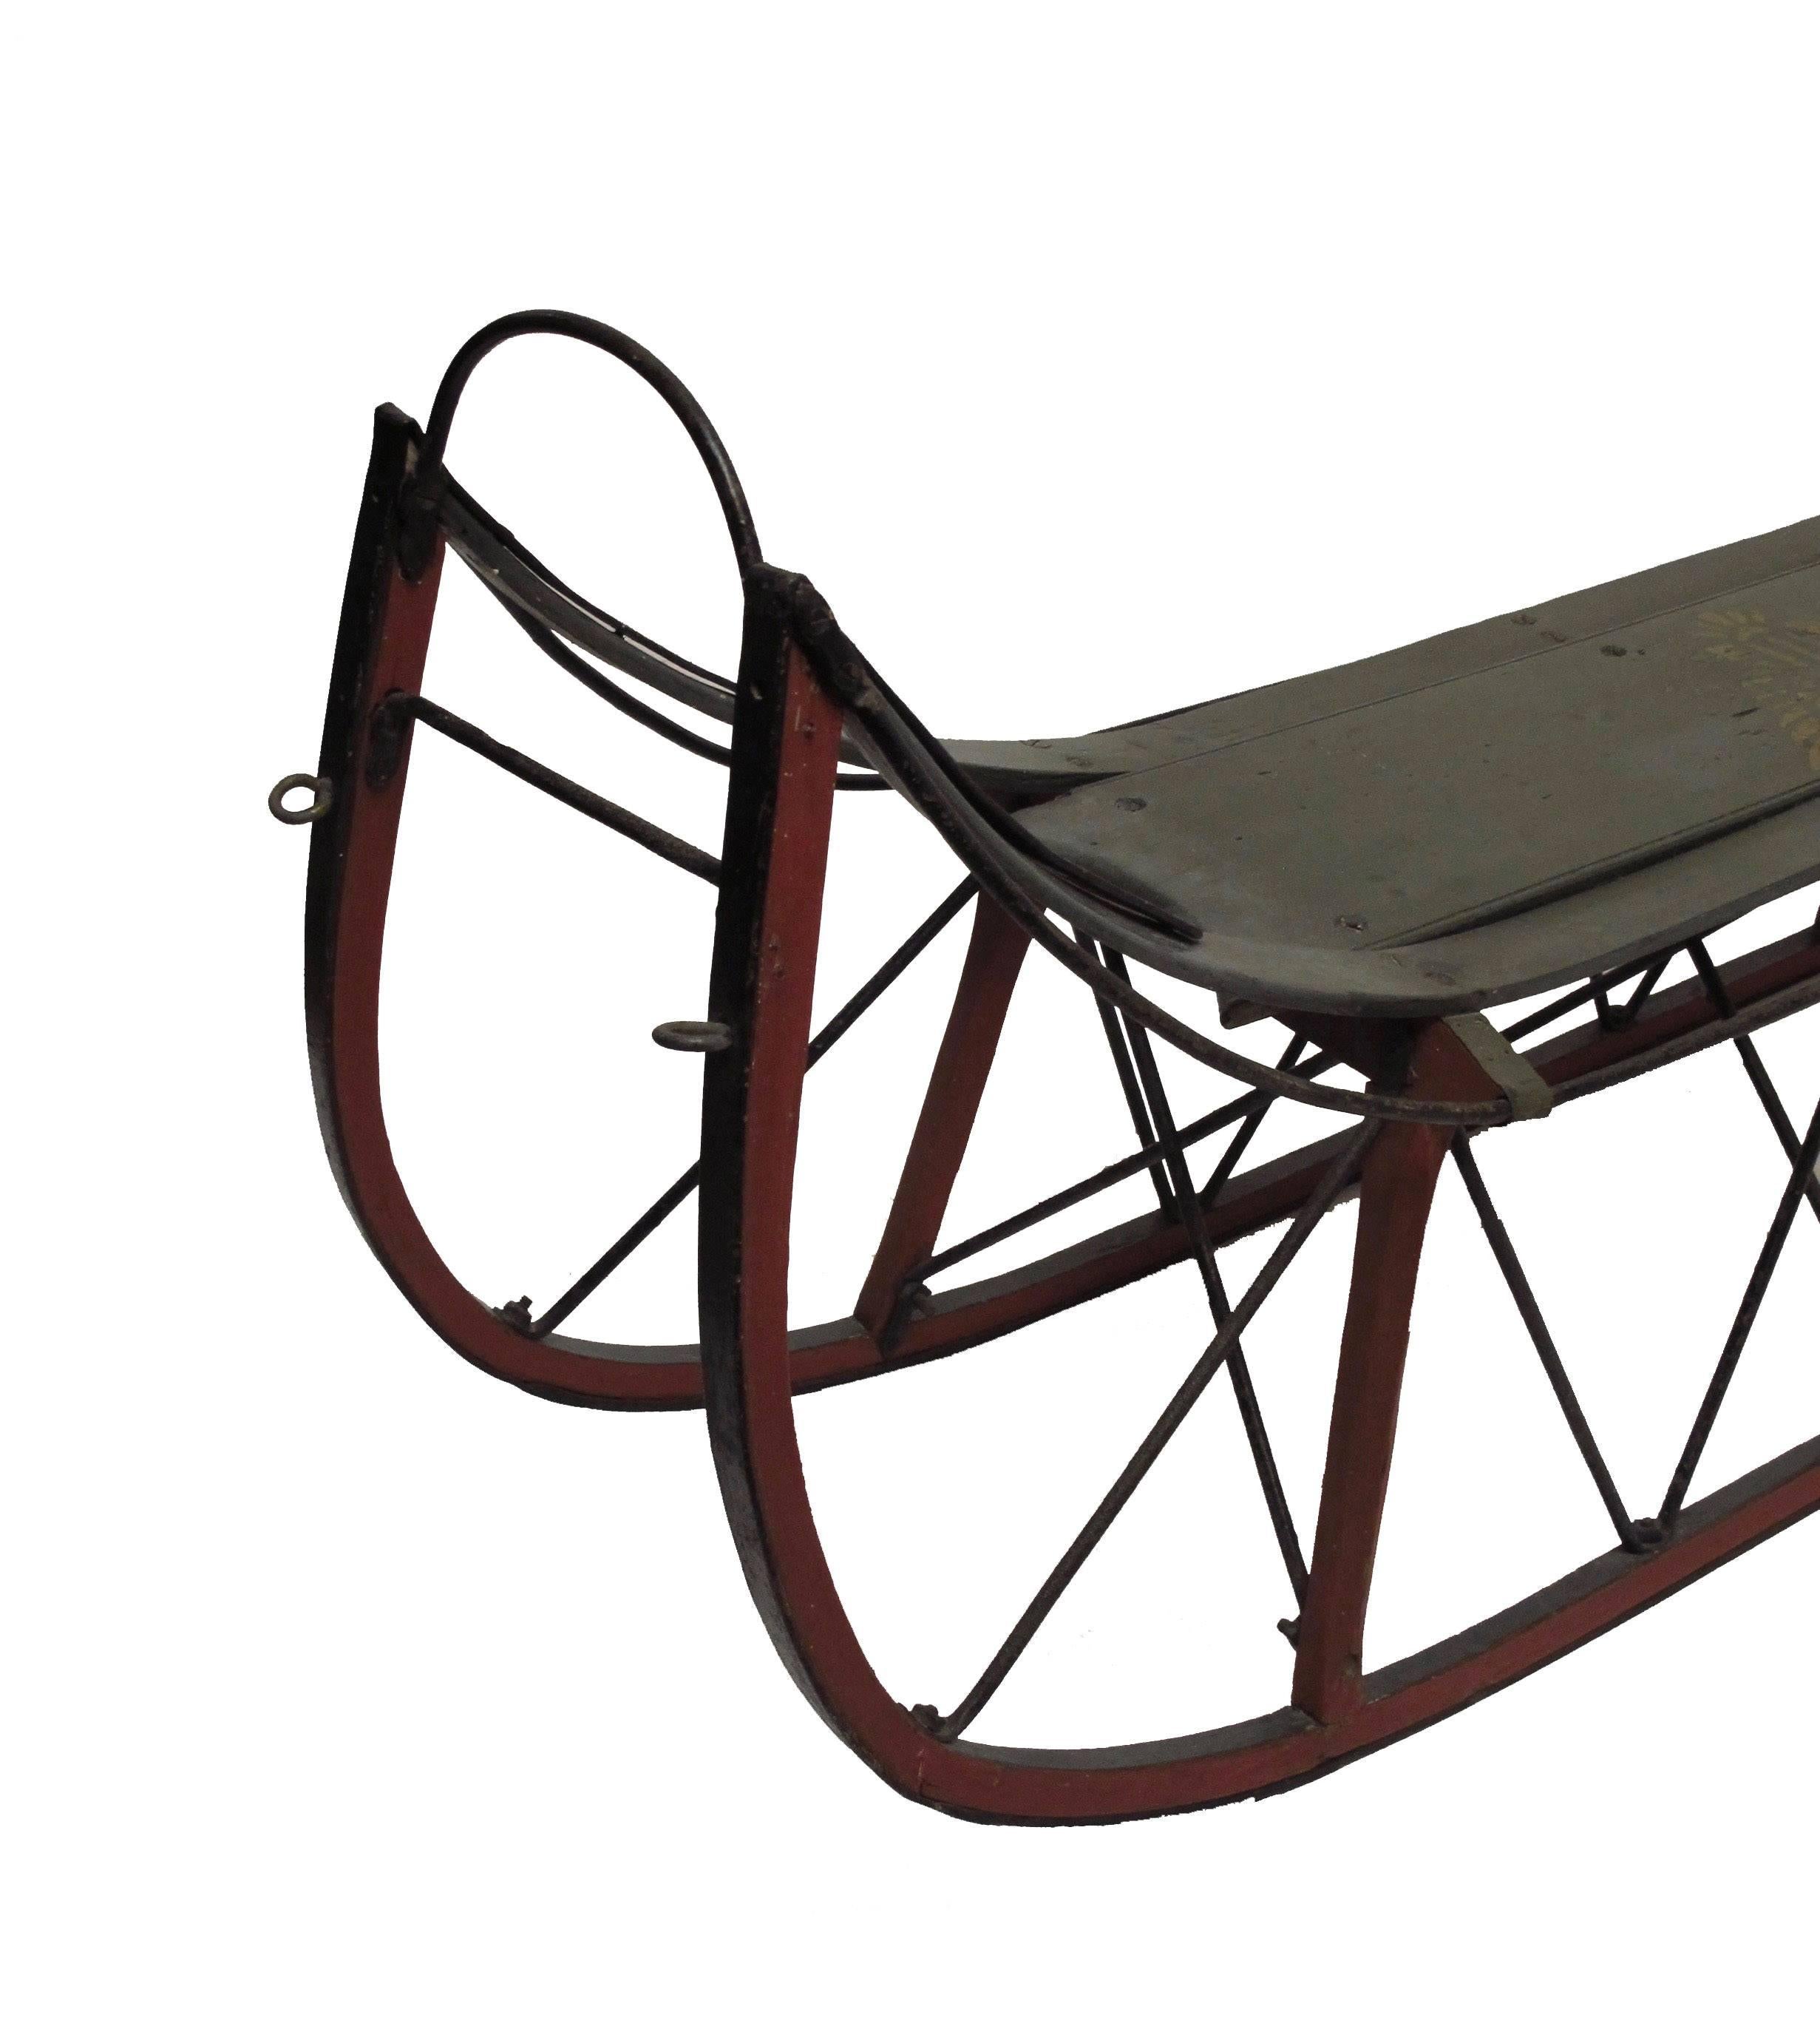 Charming old wood sled with hand wrought  iron frame. Having most of its original red and green paint (there is a small amount of overpainting). Seat height of this sled is 13 inches. This would make and unusual and interesting coffee table,